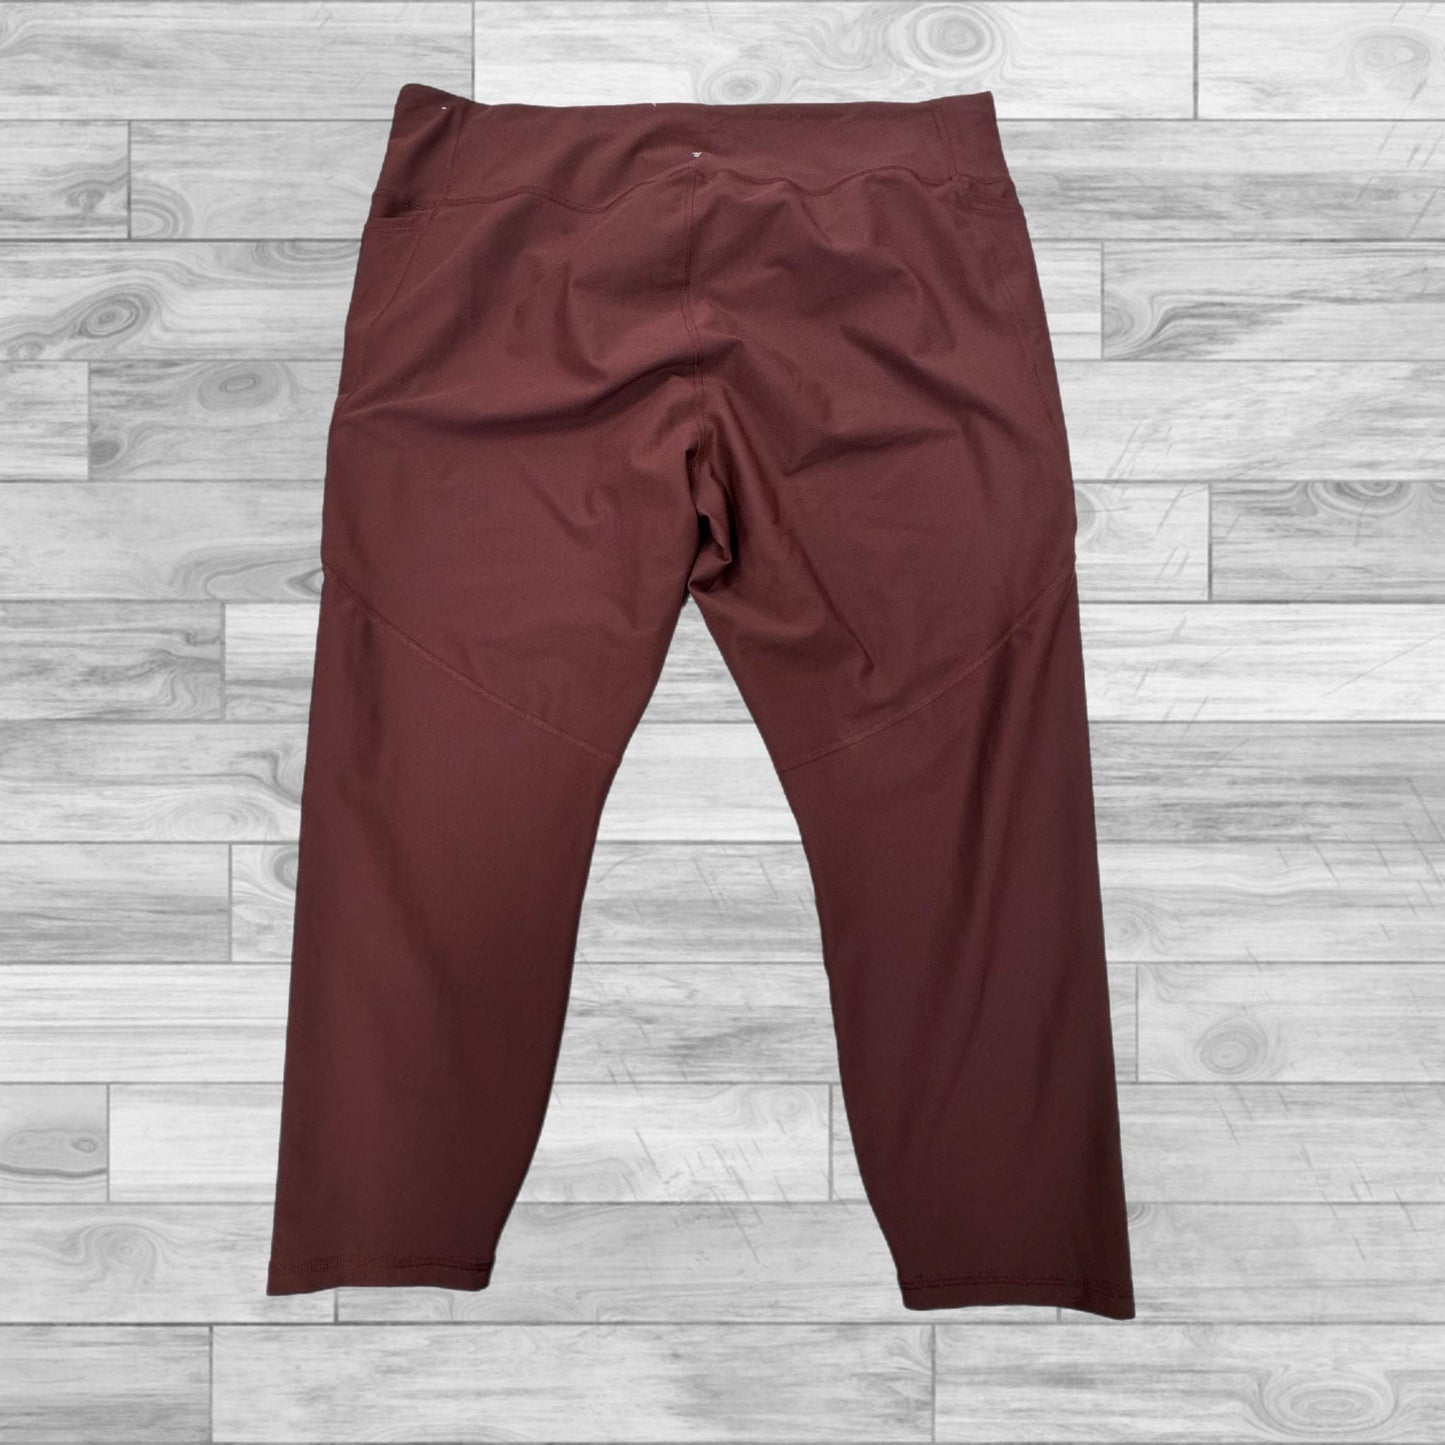 Rust Athletic Capris Old Navy, Size 4x